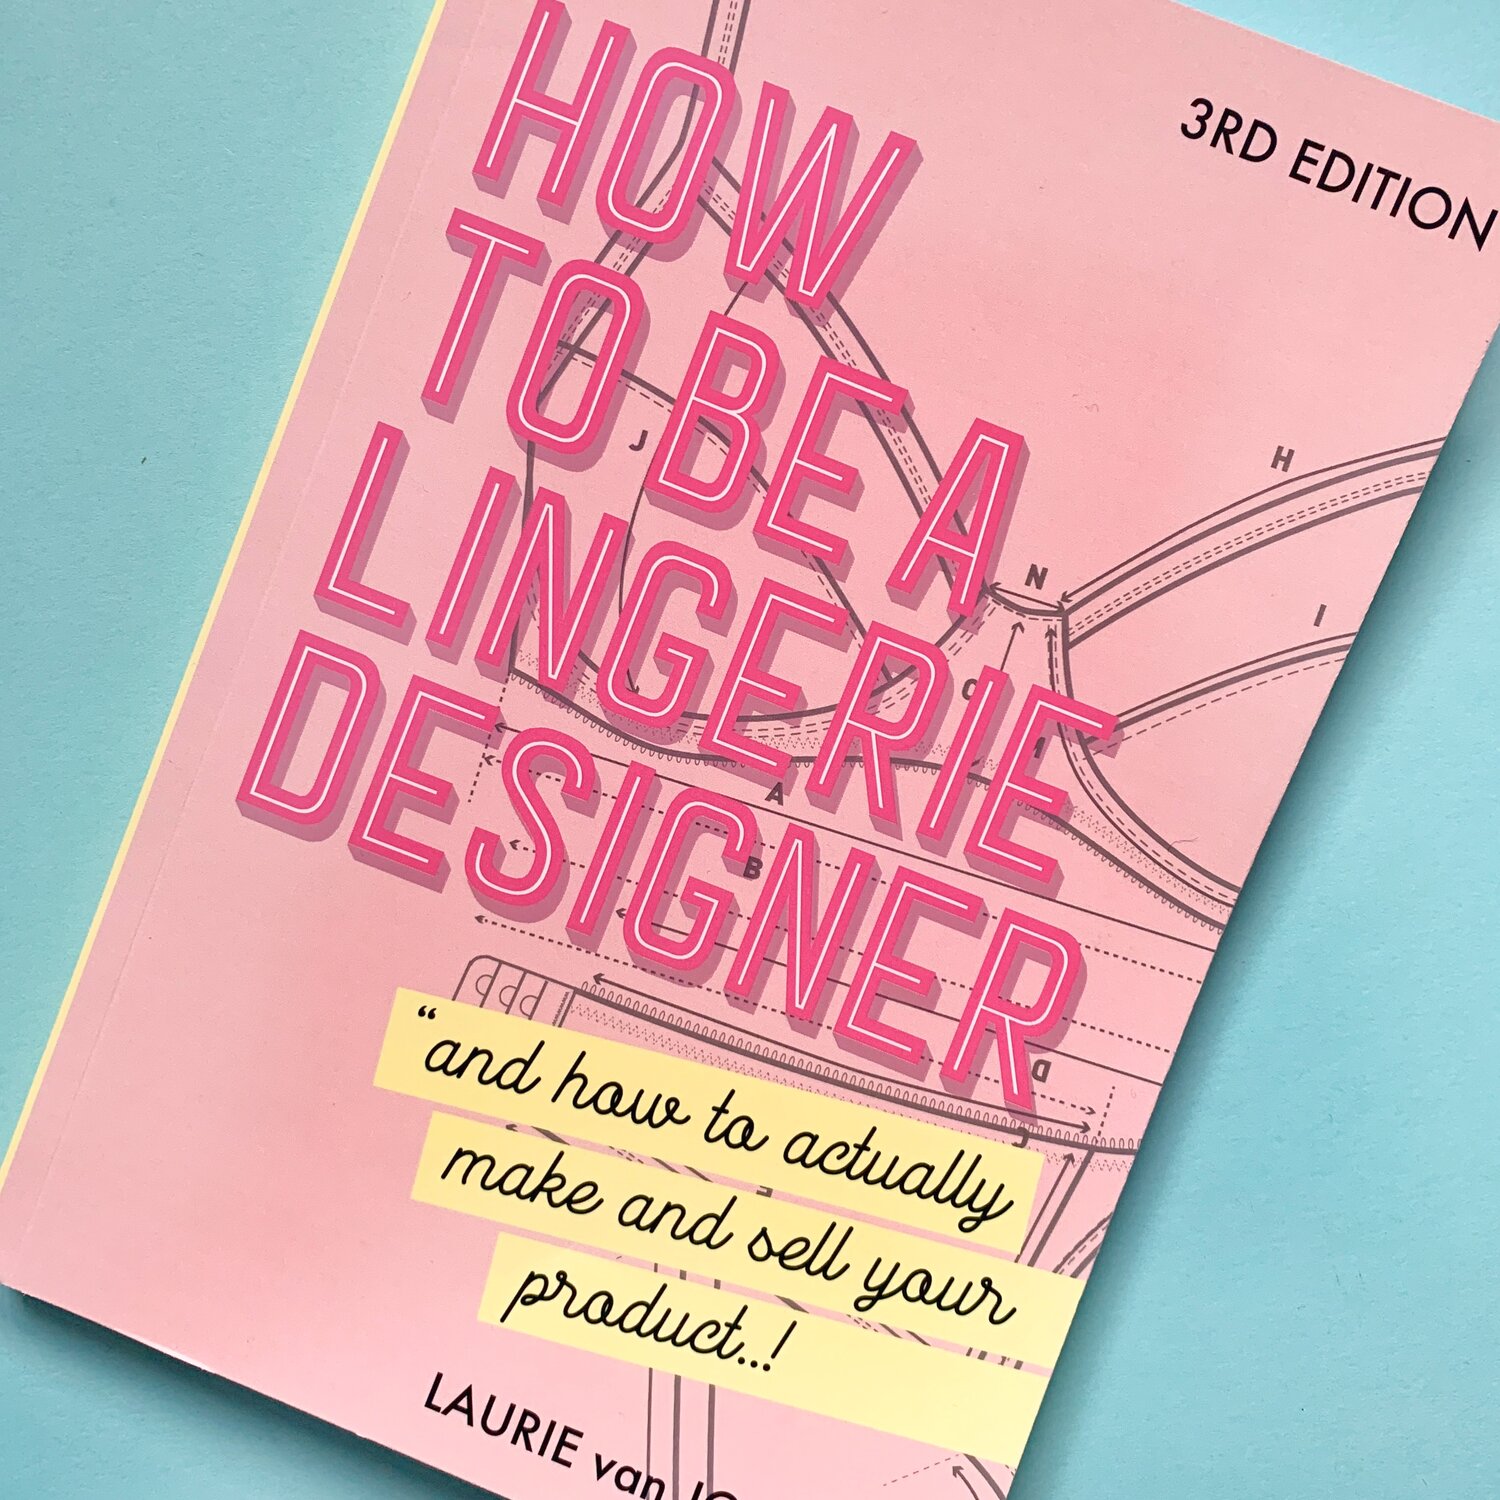 HOW TO BE A LINGERIE DESIGNER - and how to actually make and sell